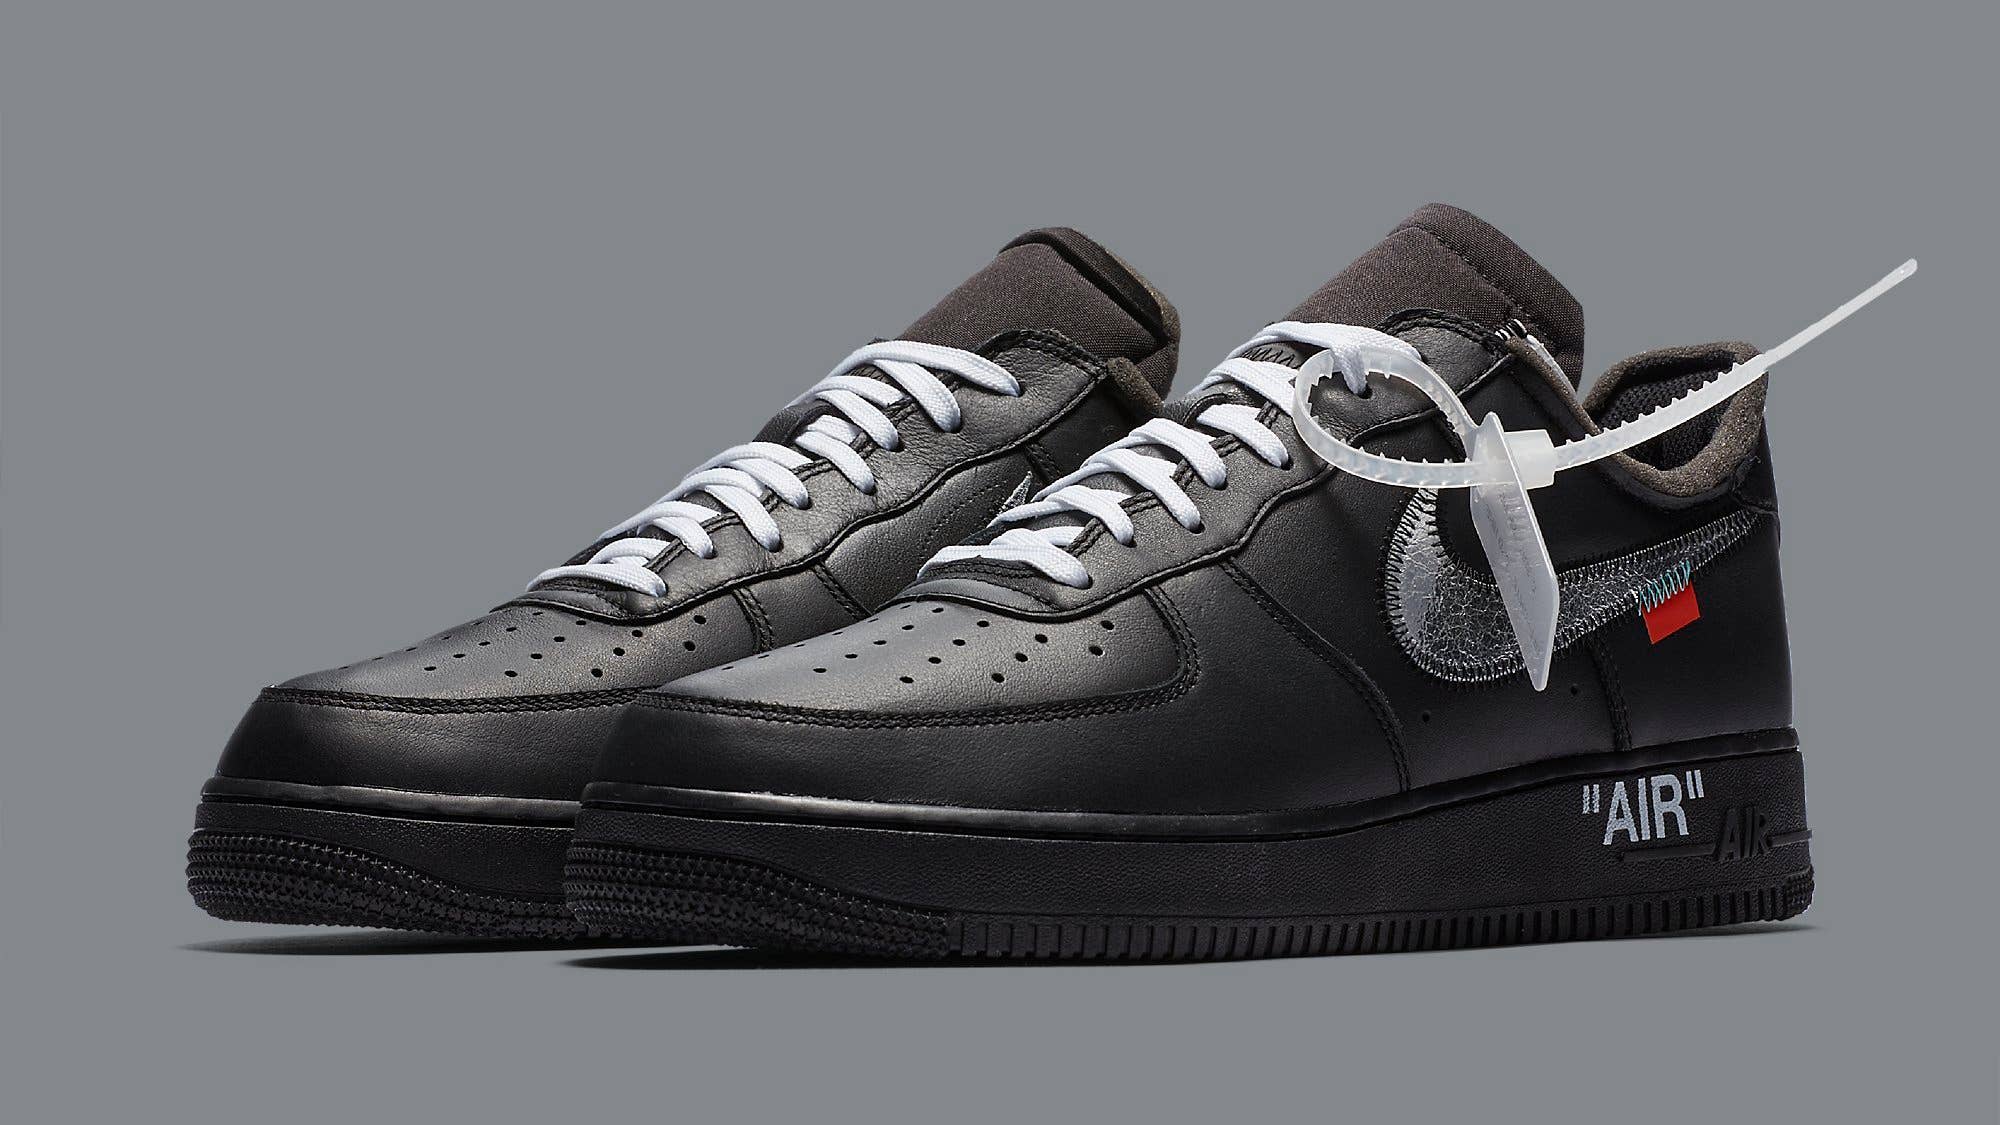 Off White x Nike Air Force 1 "MOMA"